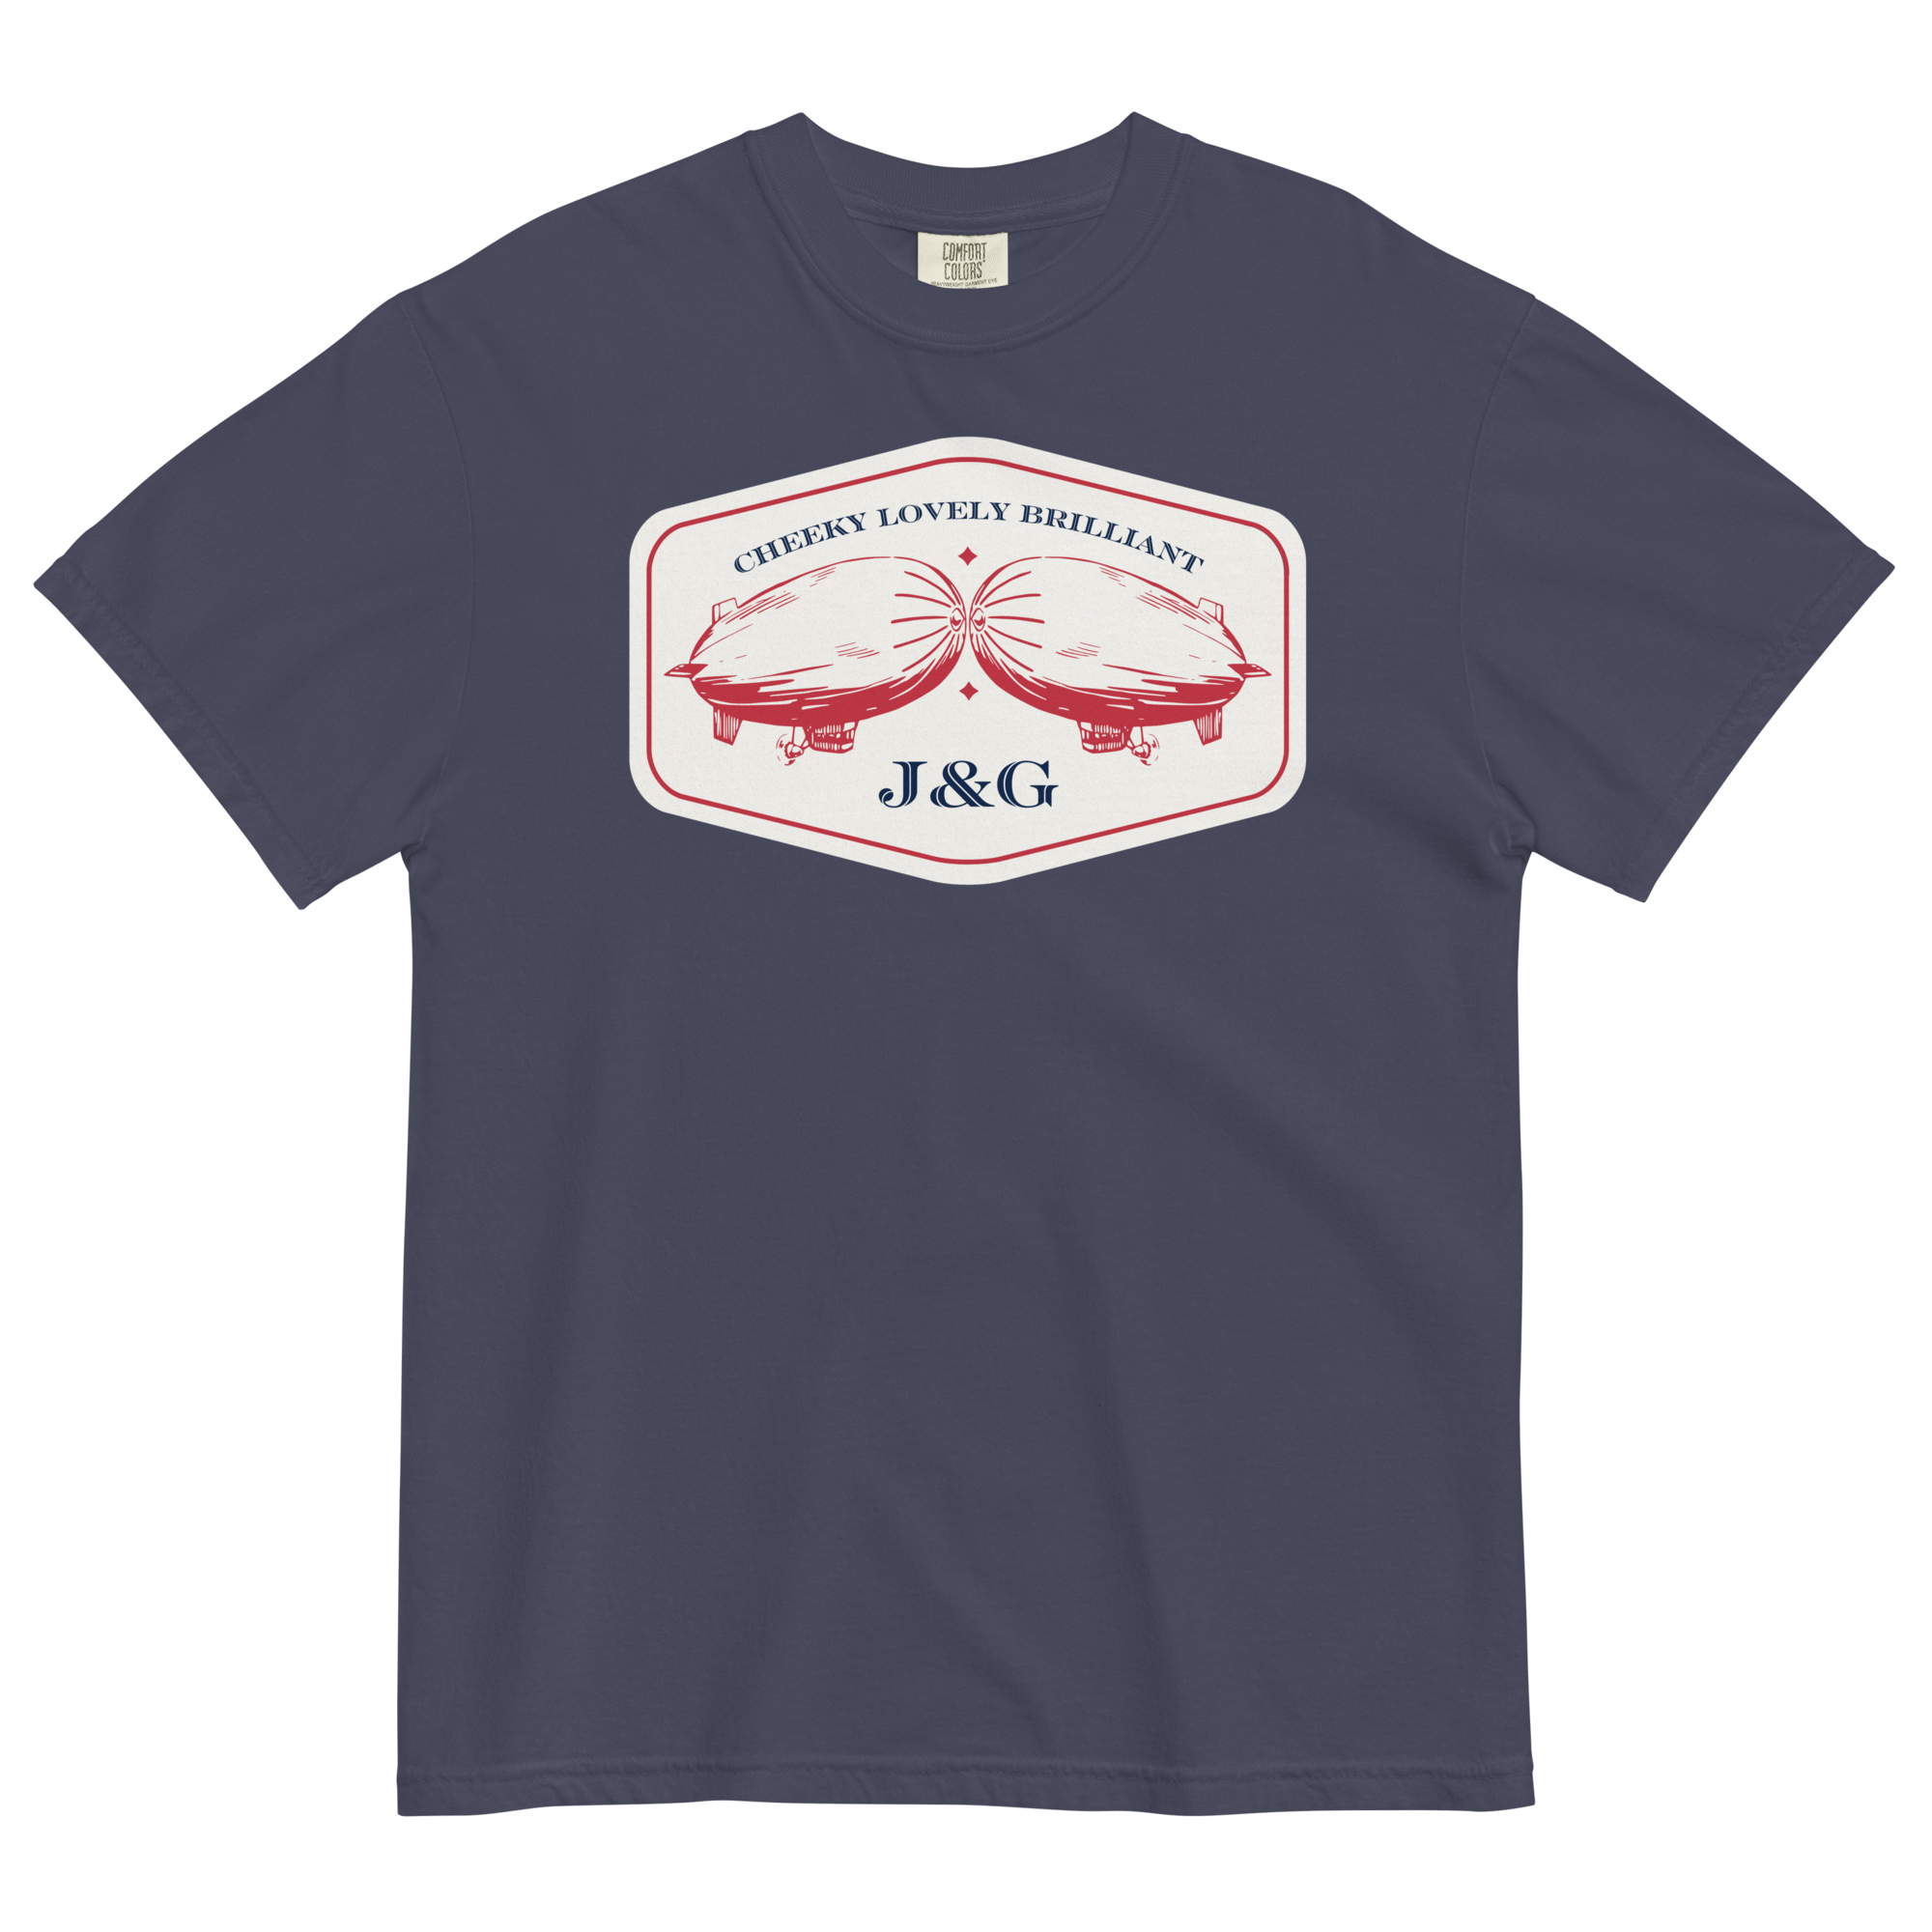 Cheeky Lovely Brilliant Airships T-shirt | Garment-Dyed Heavyweight Cotton True Navy / S Shirts & Tops Jolly & Goode